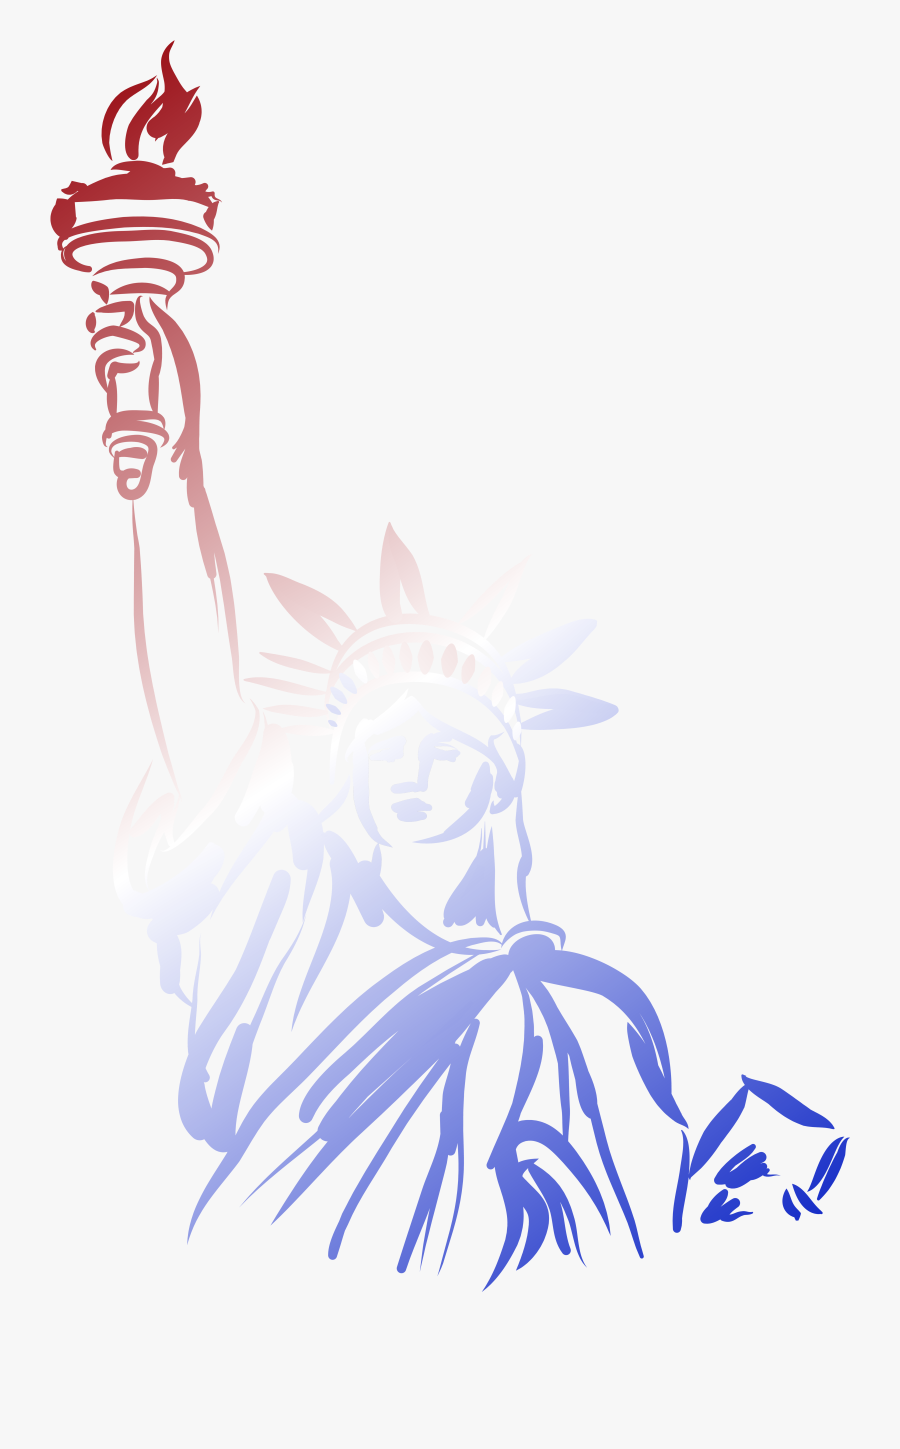 Statue Of Png Image Transparent Background - Transparent Statue Of Liberty Clipart, Transparent Clipart